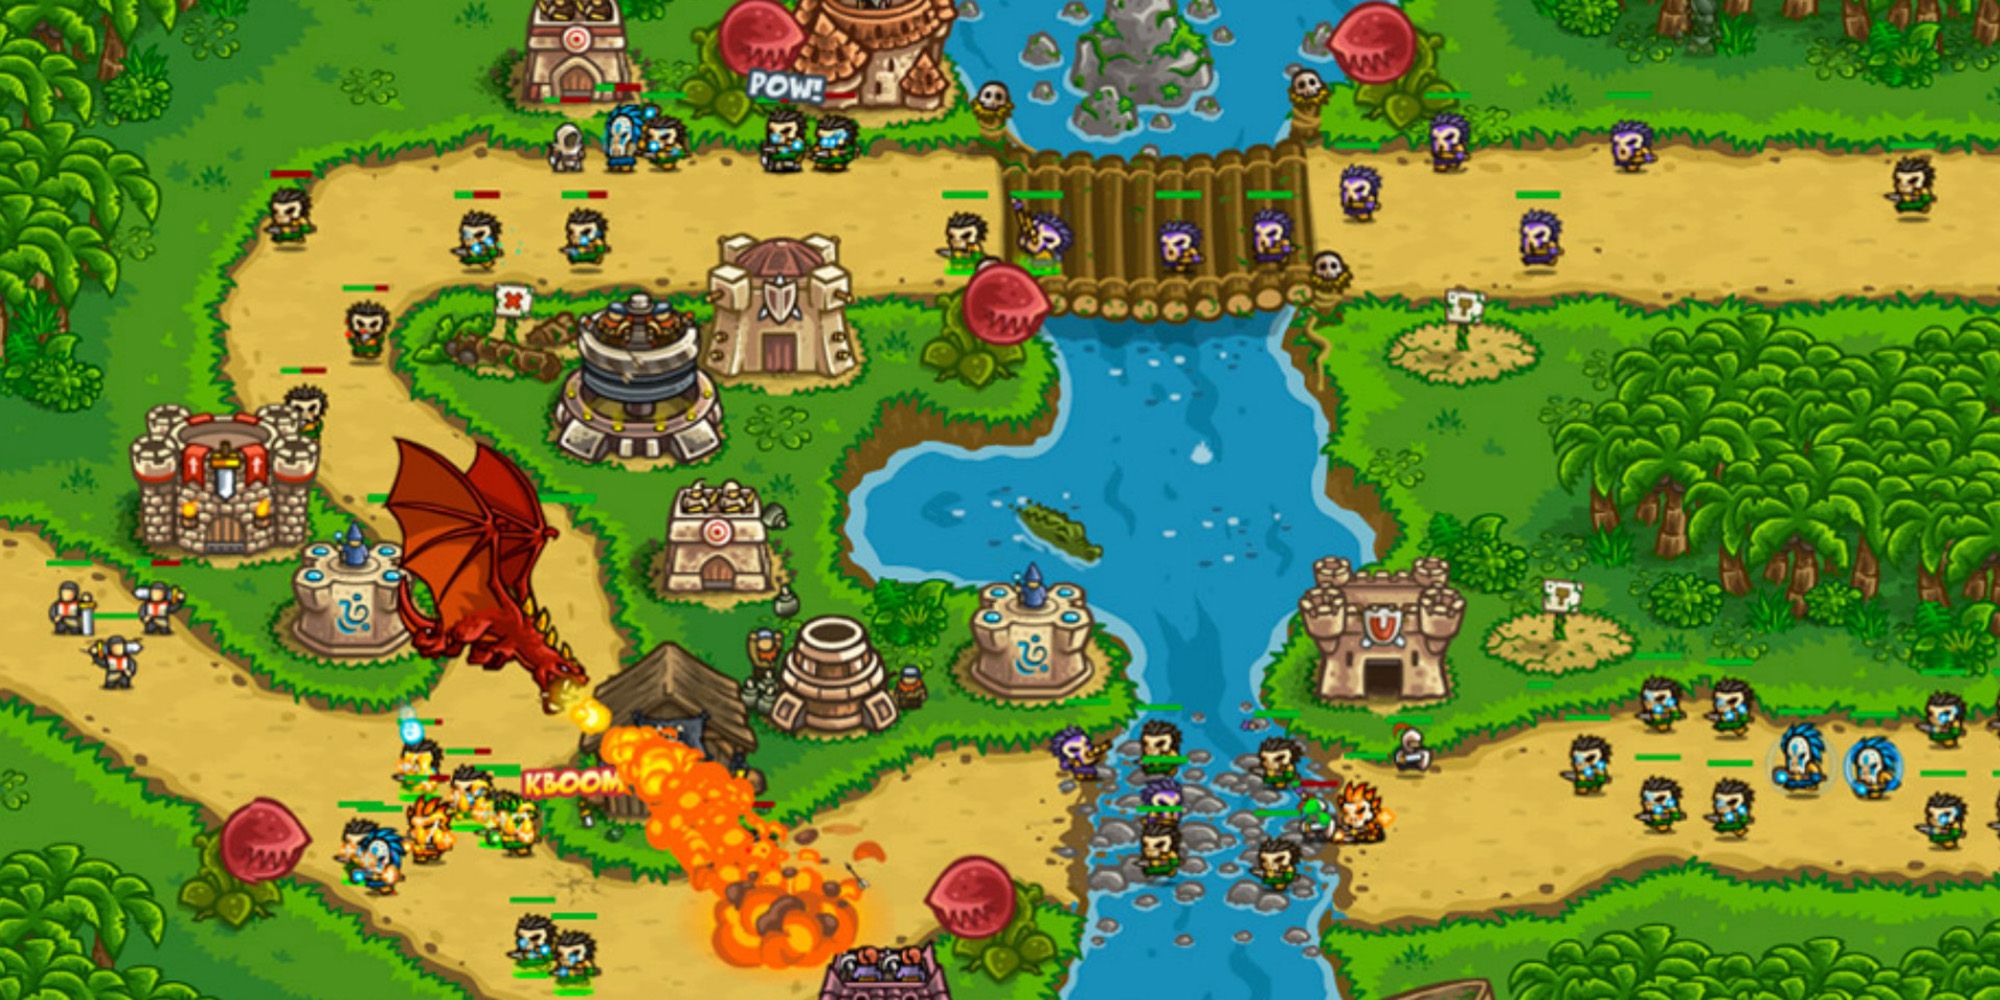 kingdom rush frontiers hordes of enemies advance along path while dragon breaths fire